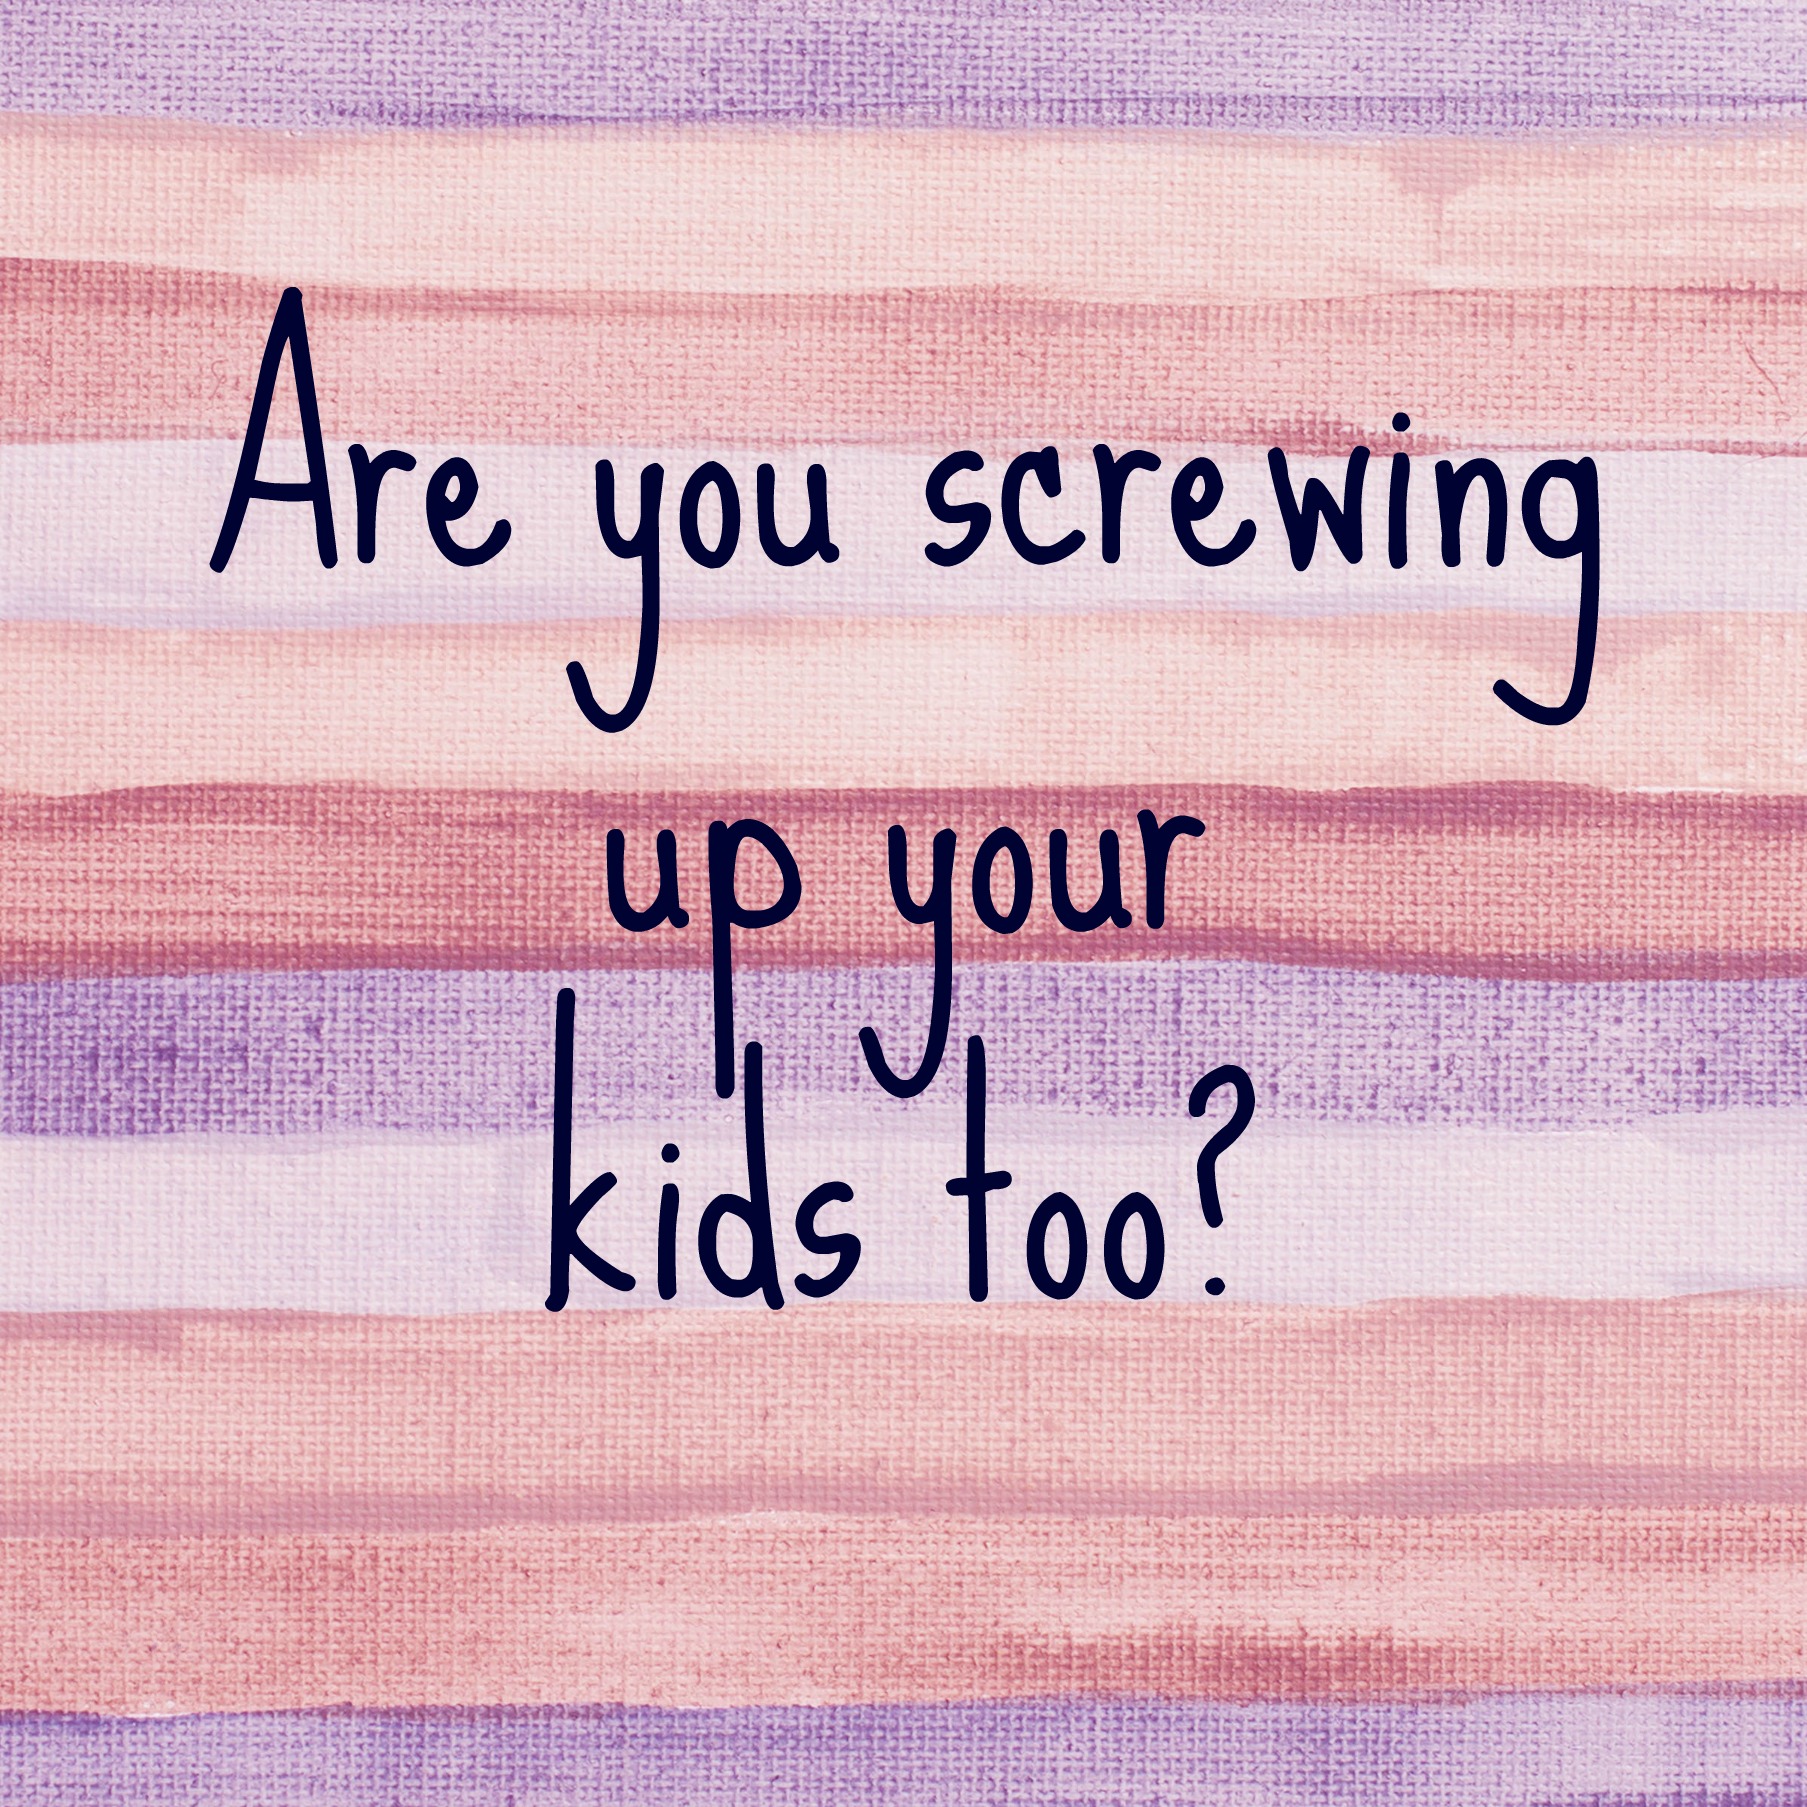 Are you screwing up your kids too 2